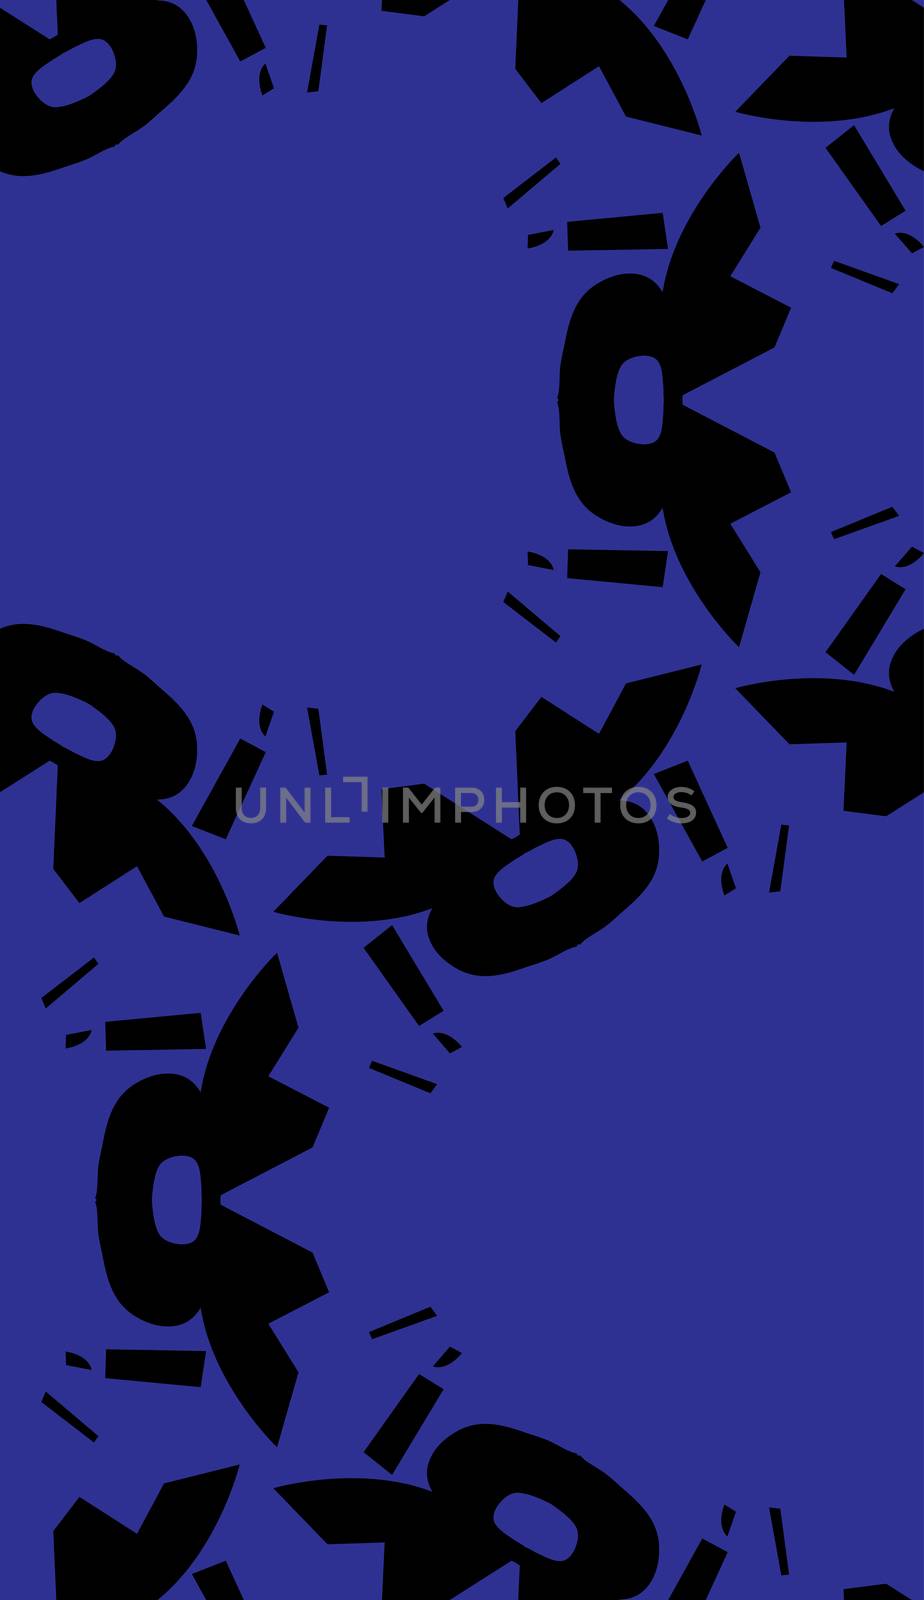 Black and blue shapes in repeating wallpaper pattern